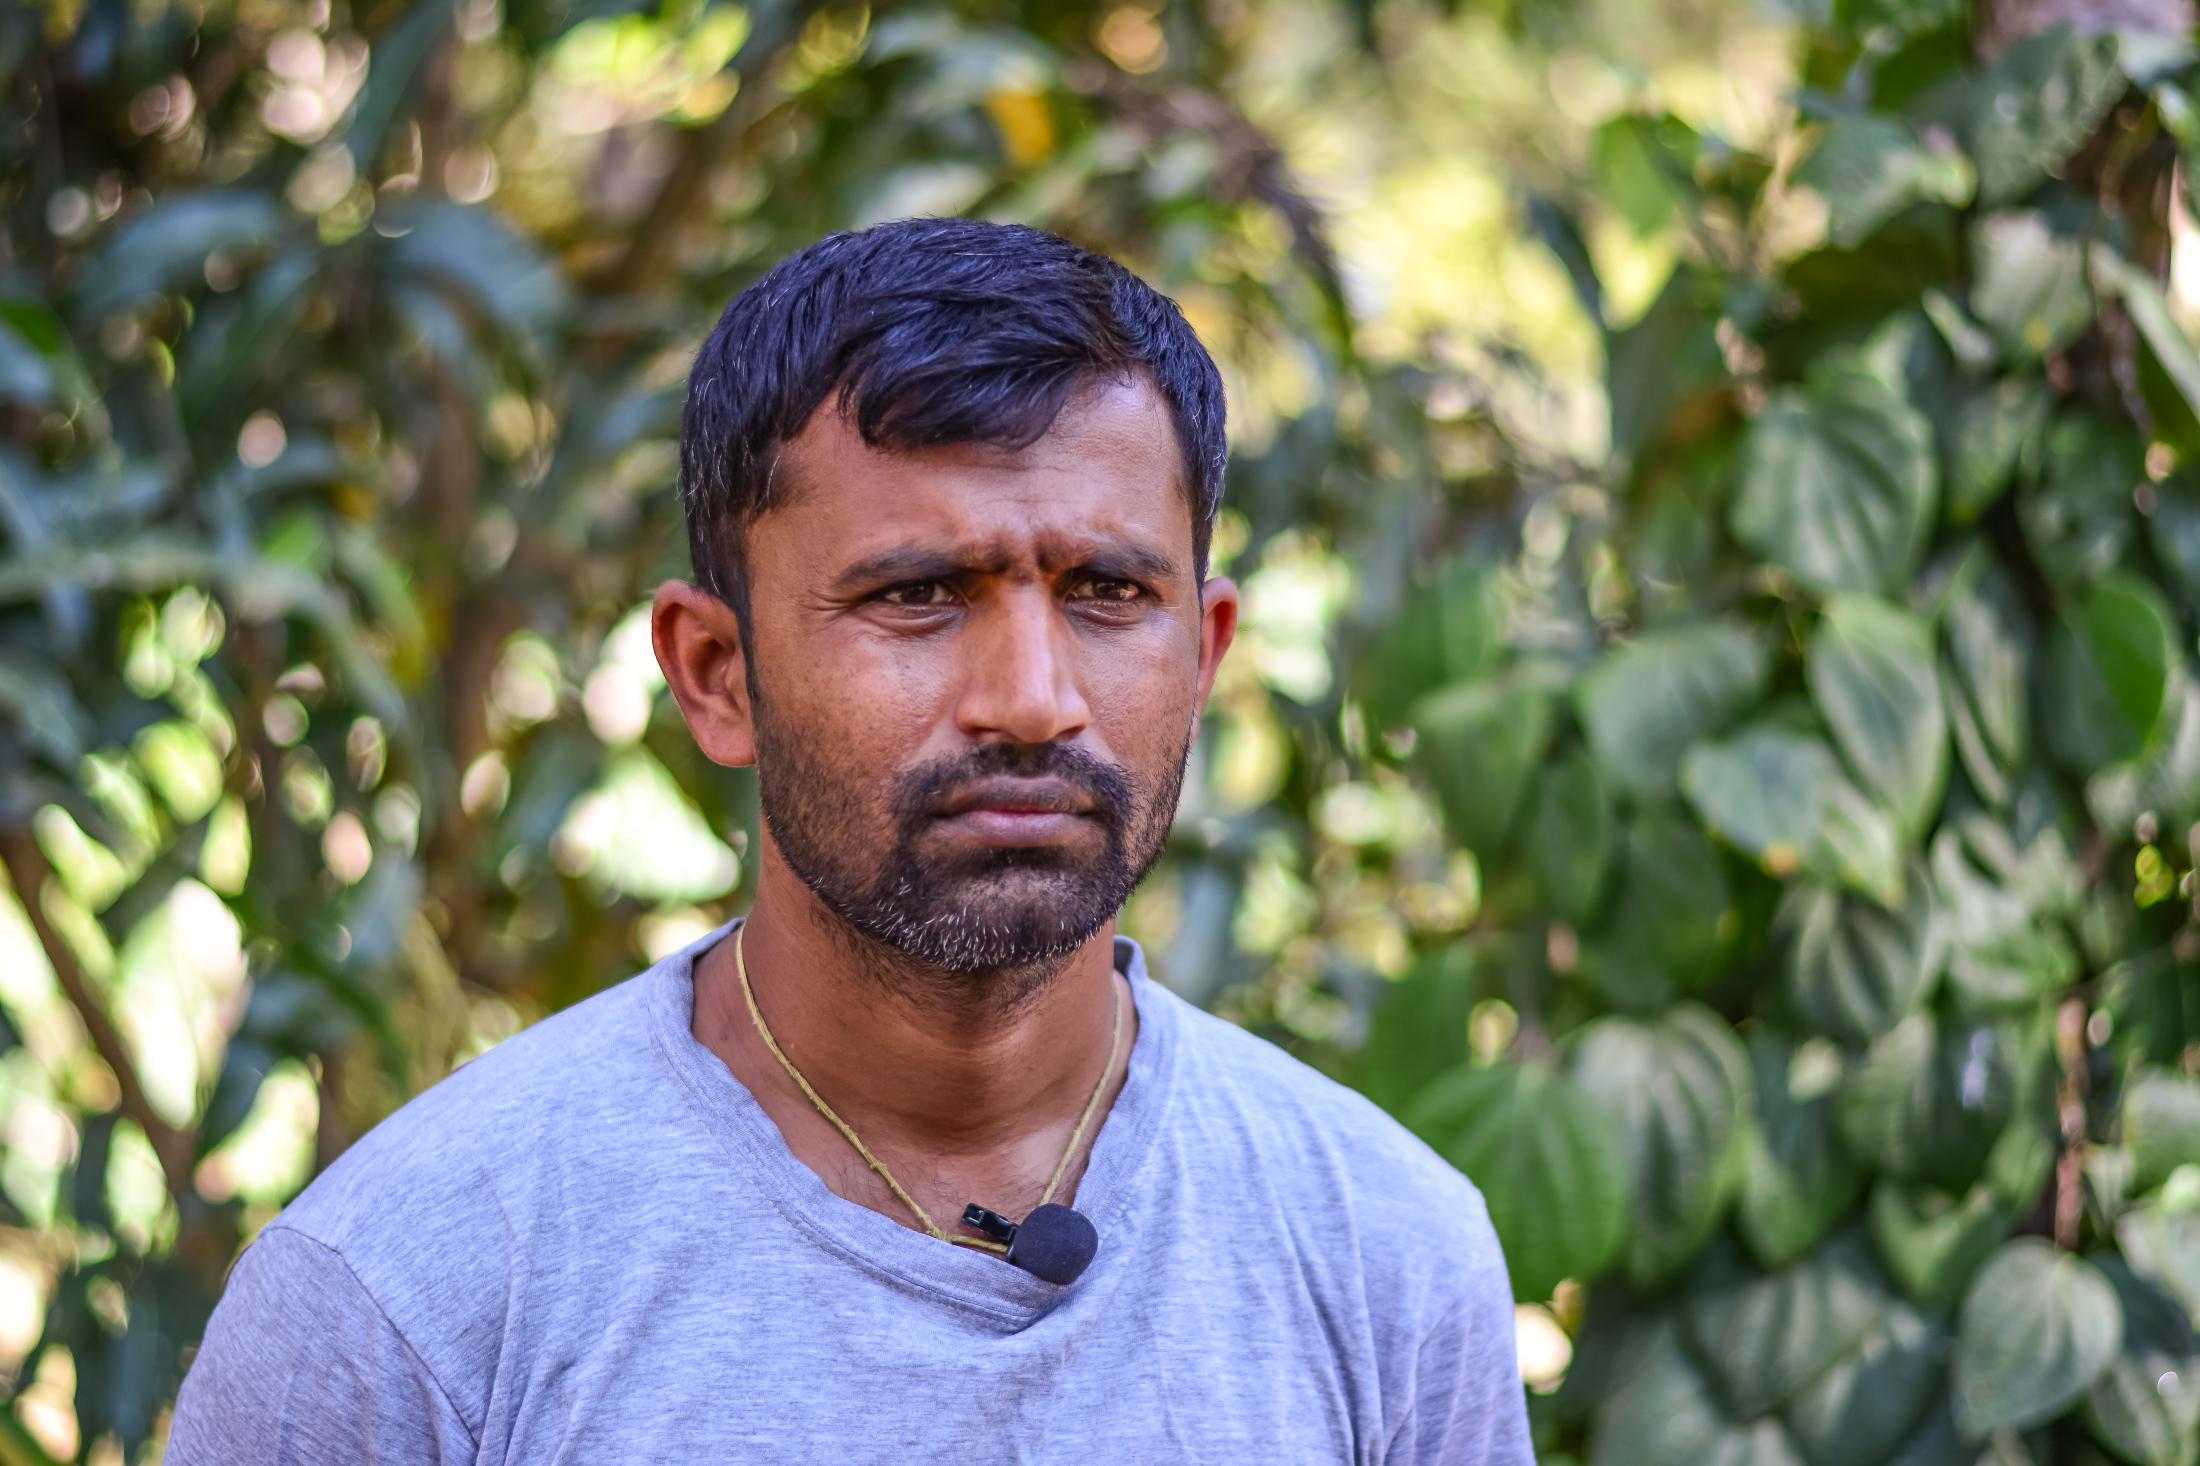 This is Swamy 37 years old who owns a piece of land which he has cultivated with the help of NABARD. He used to grow coffee, pepper, jackfruit, chikoo, orange and avocado. Most of these crops are not doing well as the source of water which is a lake has completely dried up. However, he still grows a few fruits and is doing well with dairy. He is very thankful for the training he received from NABARD on nursery as he benefited a lot out of it. He trained a lot of people as well. He now also owns two cars and runs a taxi service.